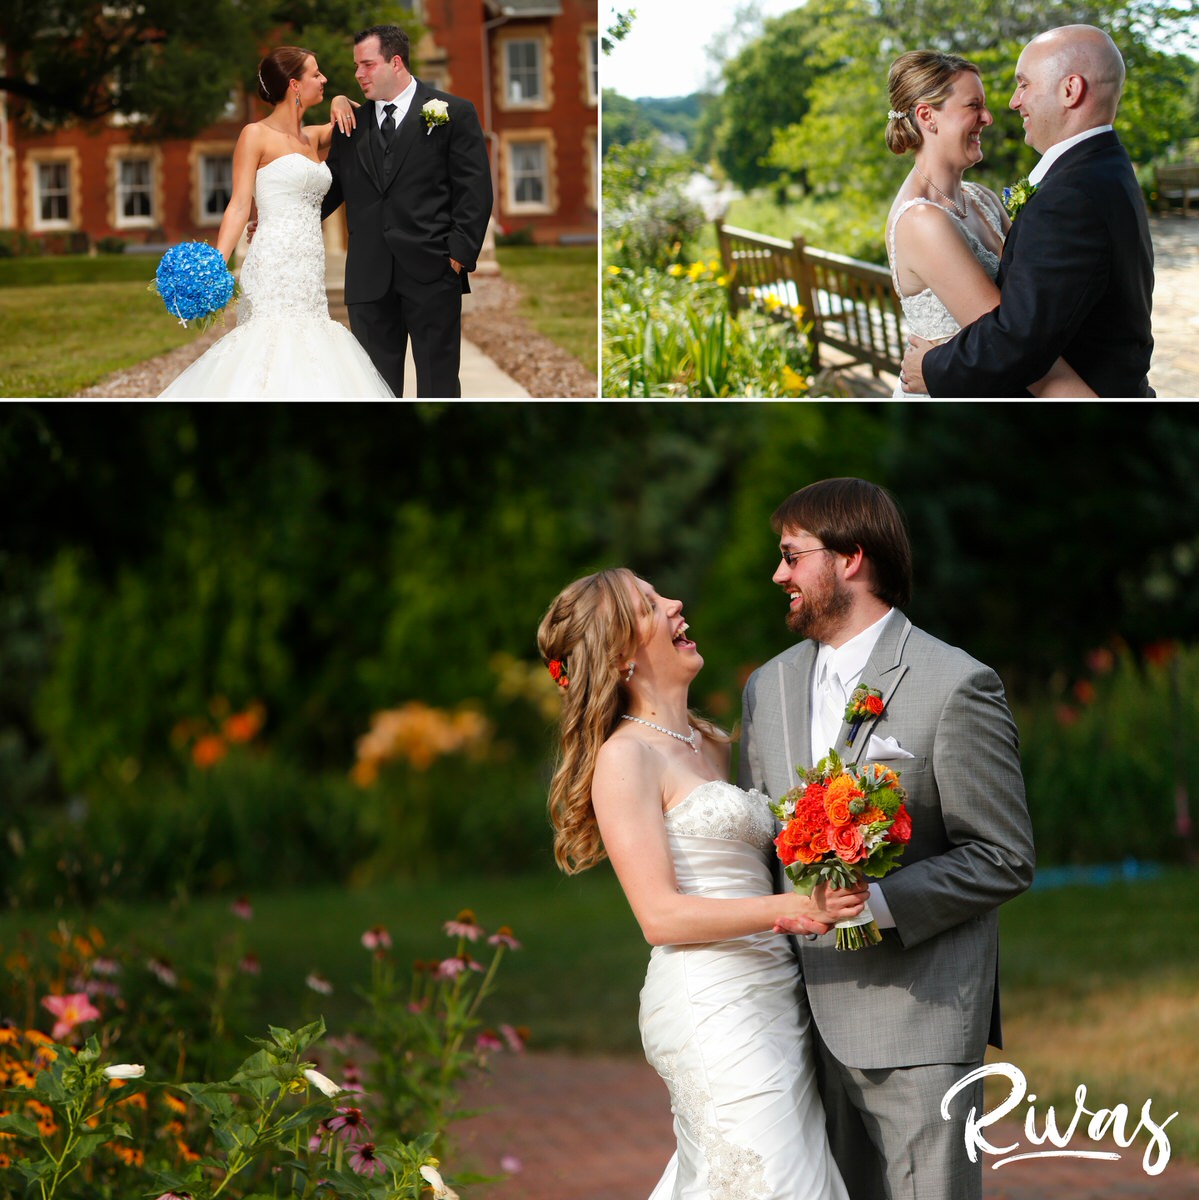 Three portraits of three different brides and grooms on their Kansas City wedding days, all embracing and laughing together.